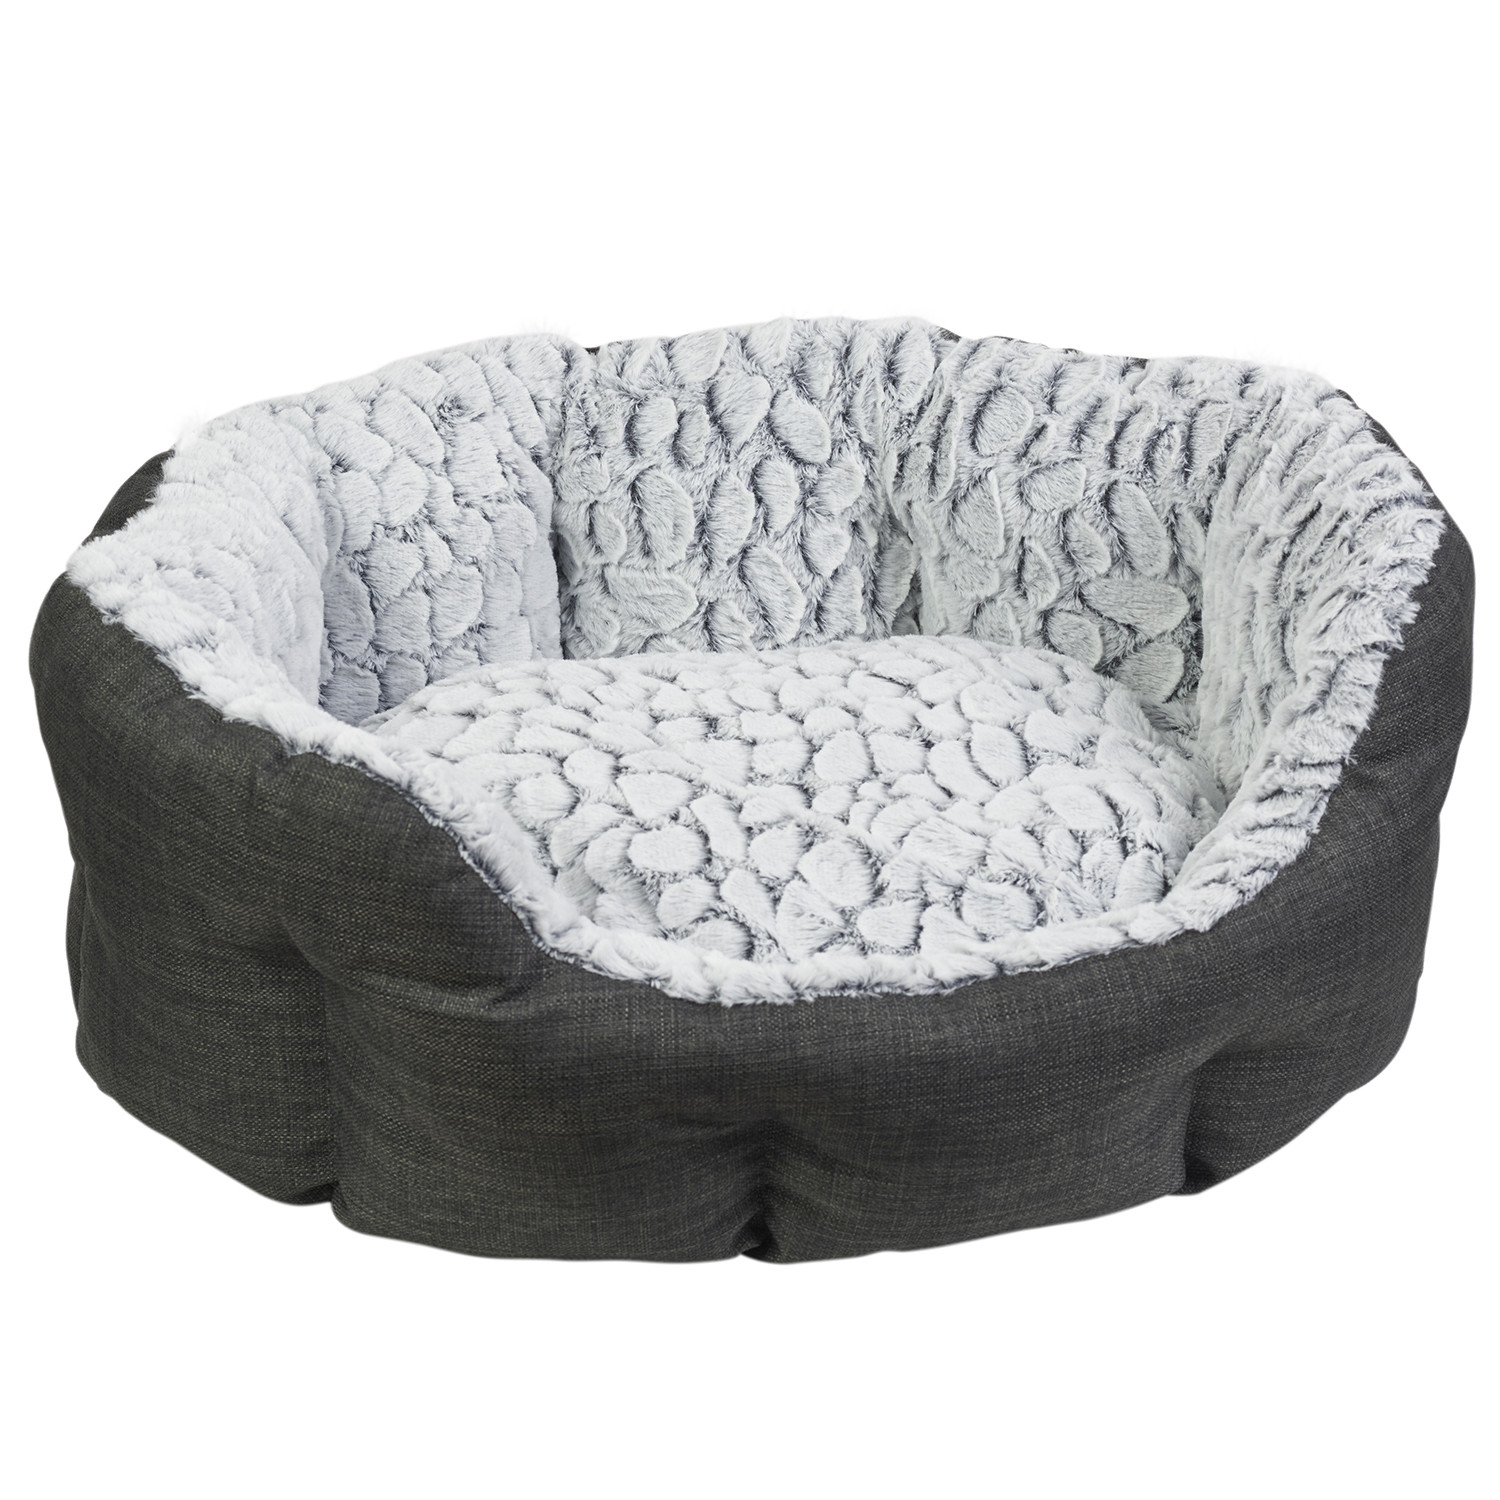 Clever Paws Small Grey Soft Dog Bed Image